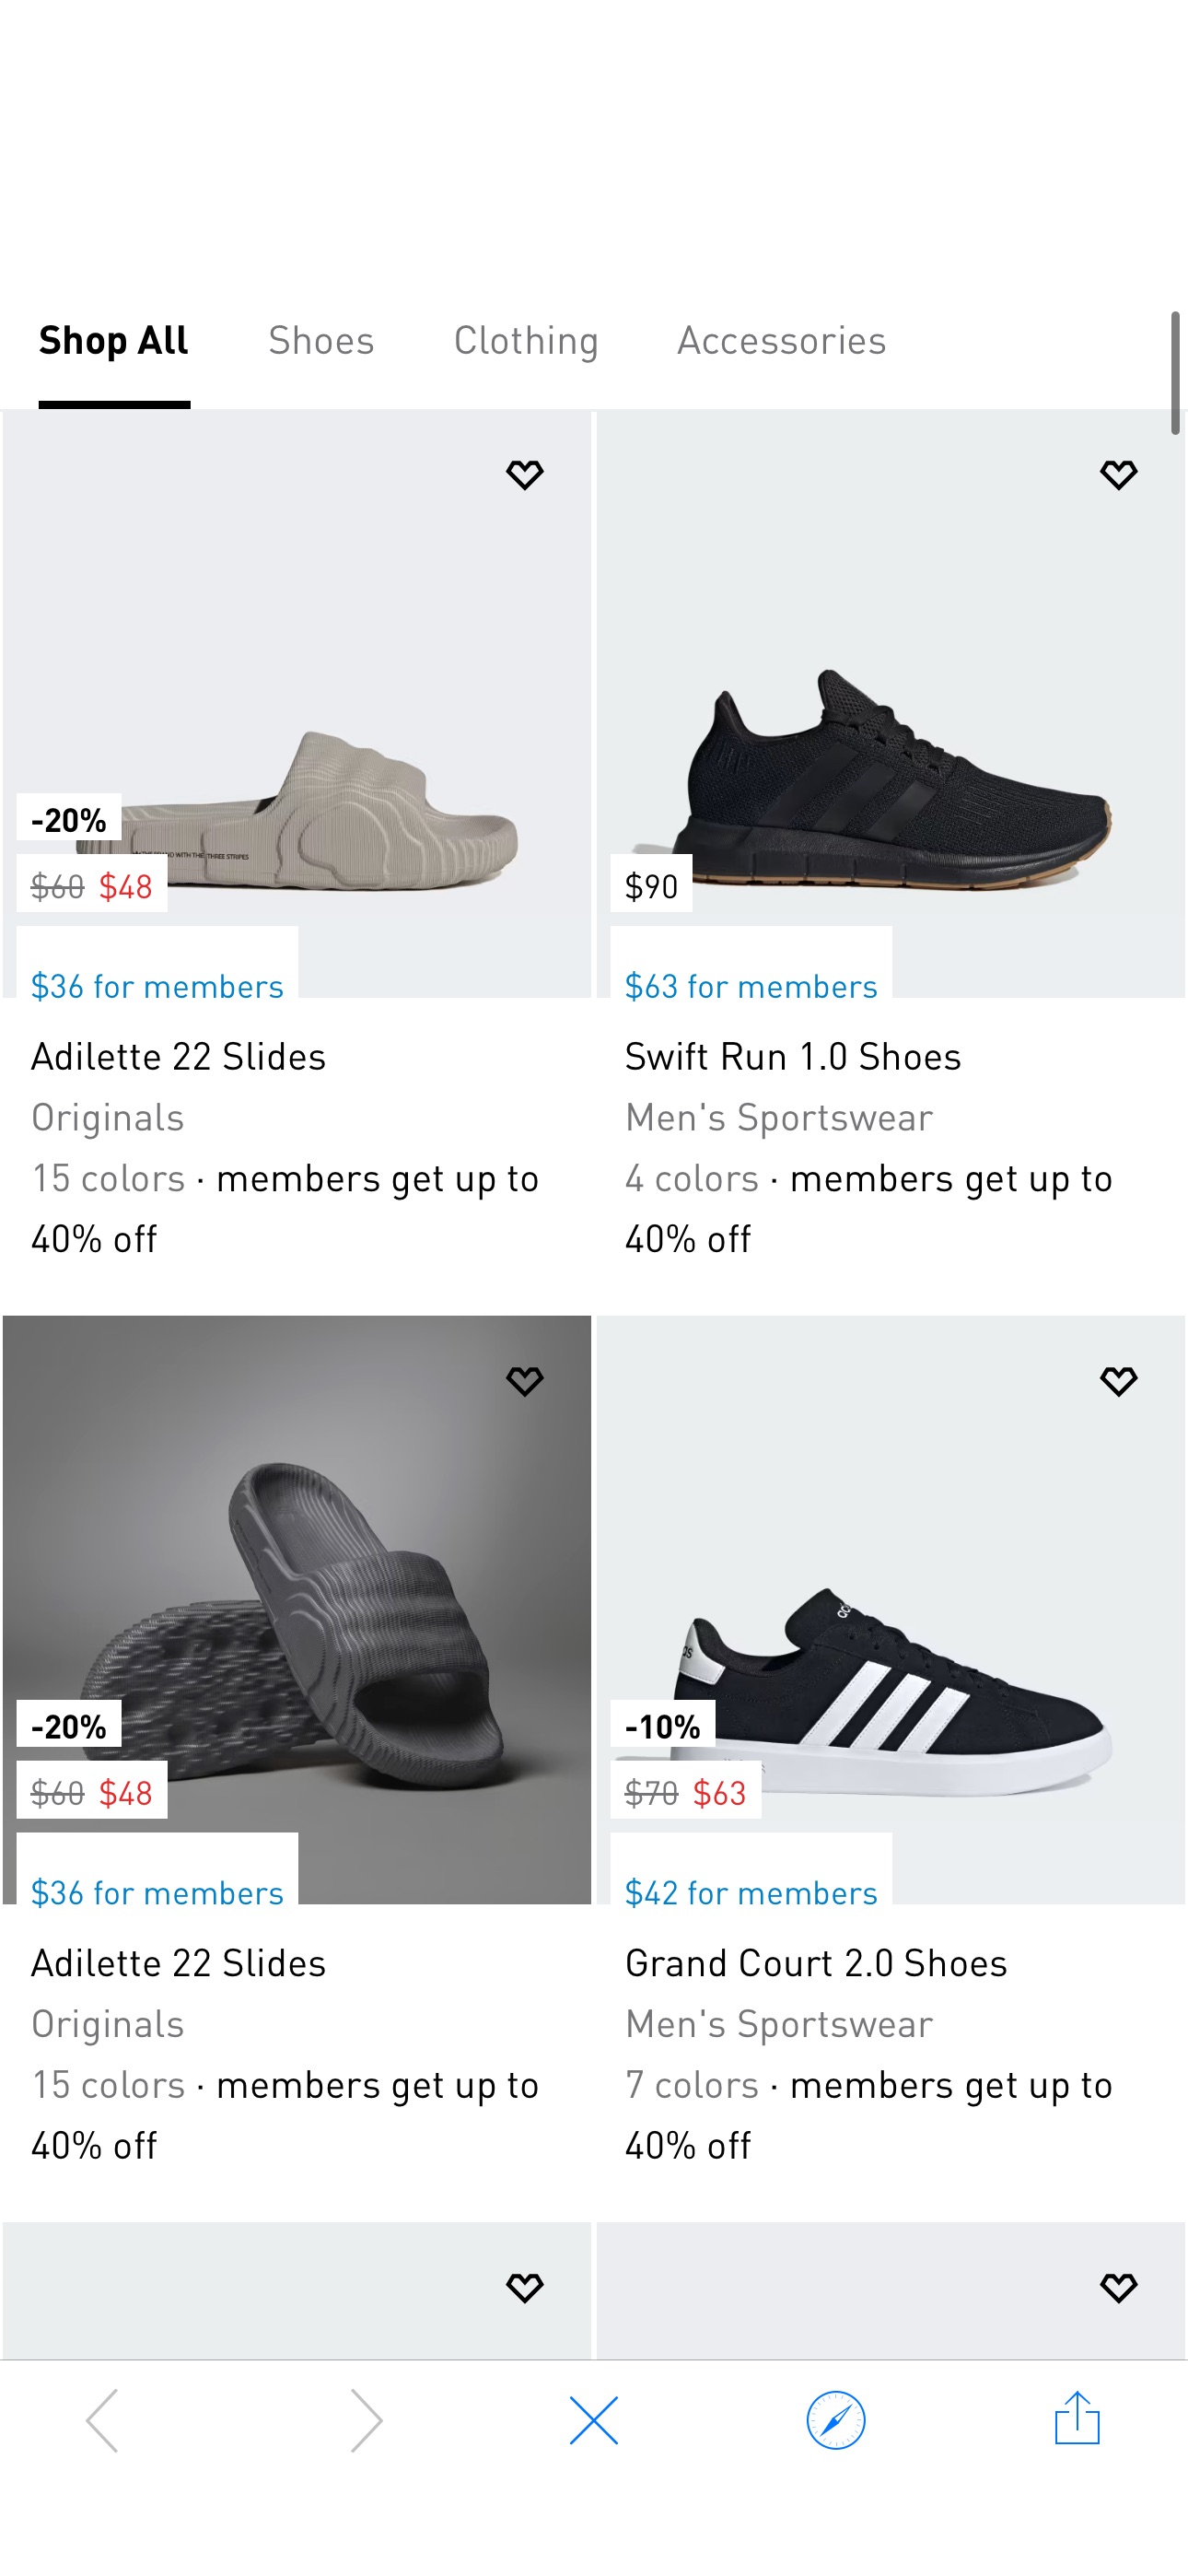 Shop Men's Shoes & Clothing Deals | adidas US Hot Adidas Sale
Up to 70% off + extra 40% off at checkout + 15% off with code: OFF15 (log in)